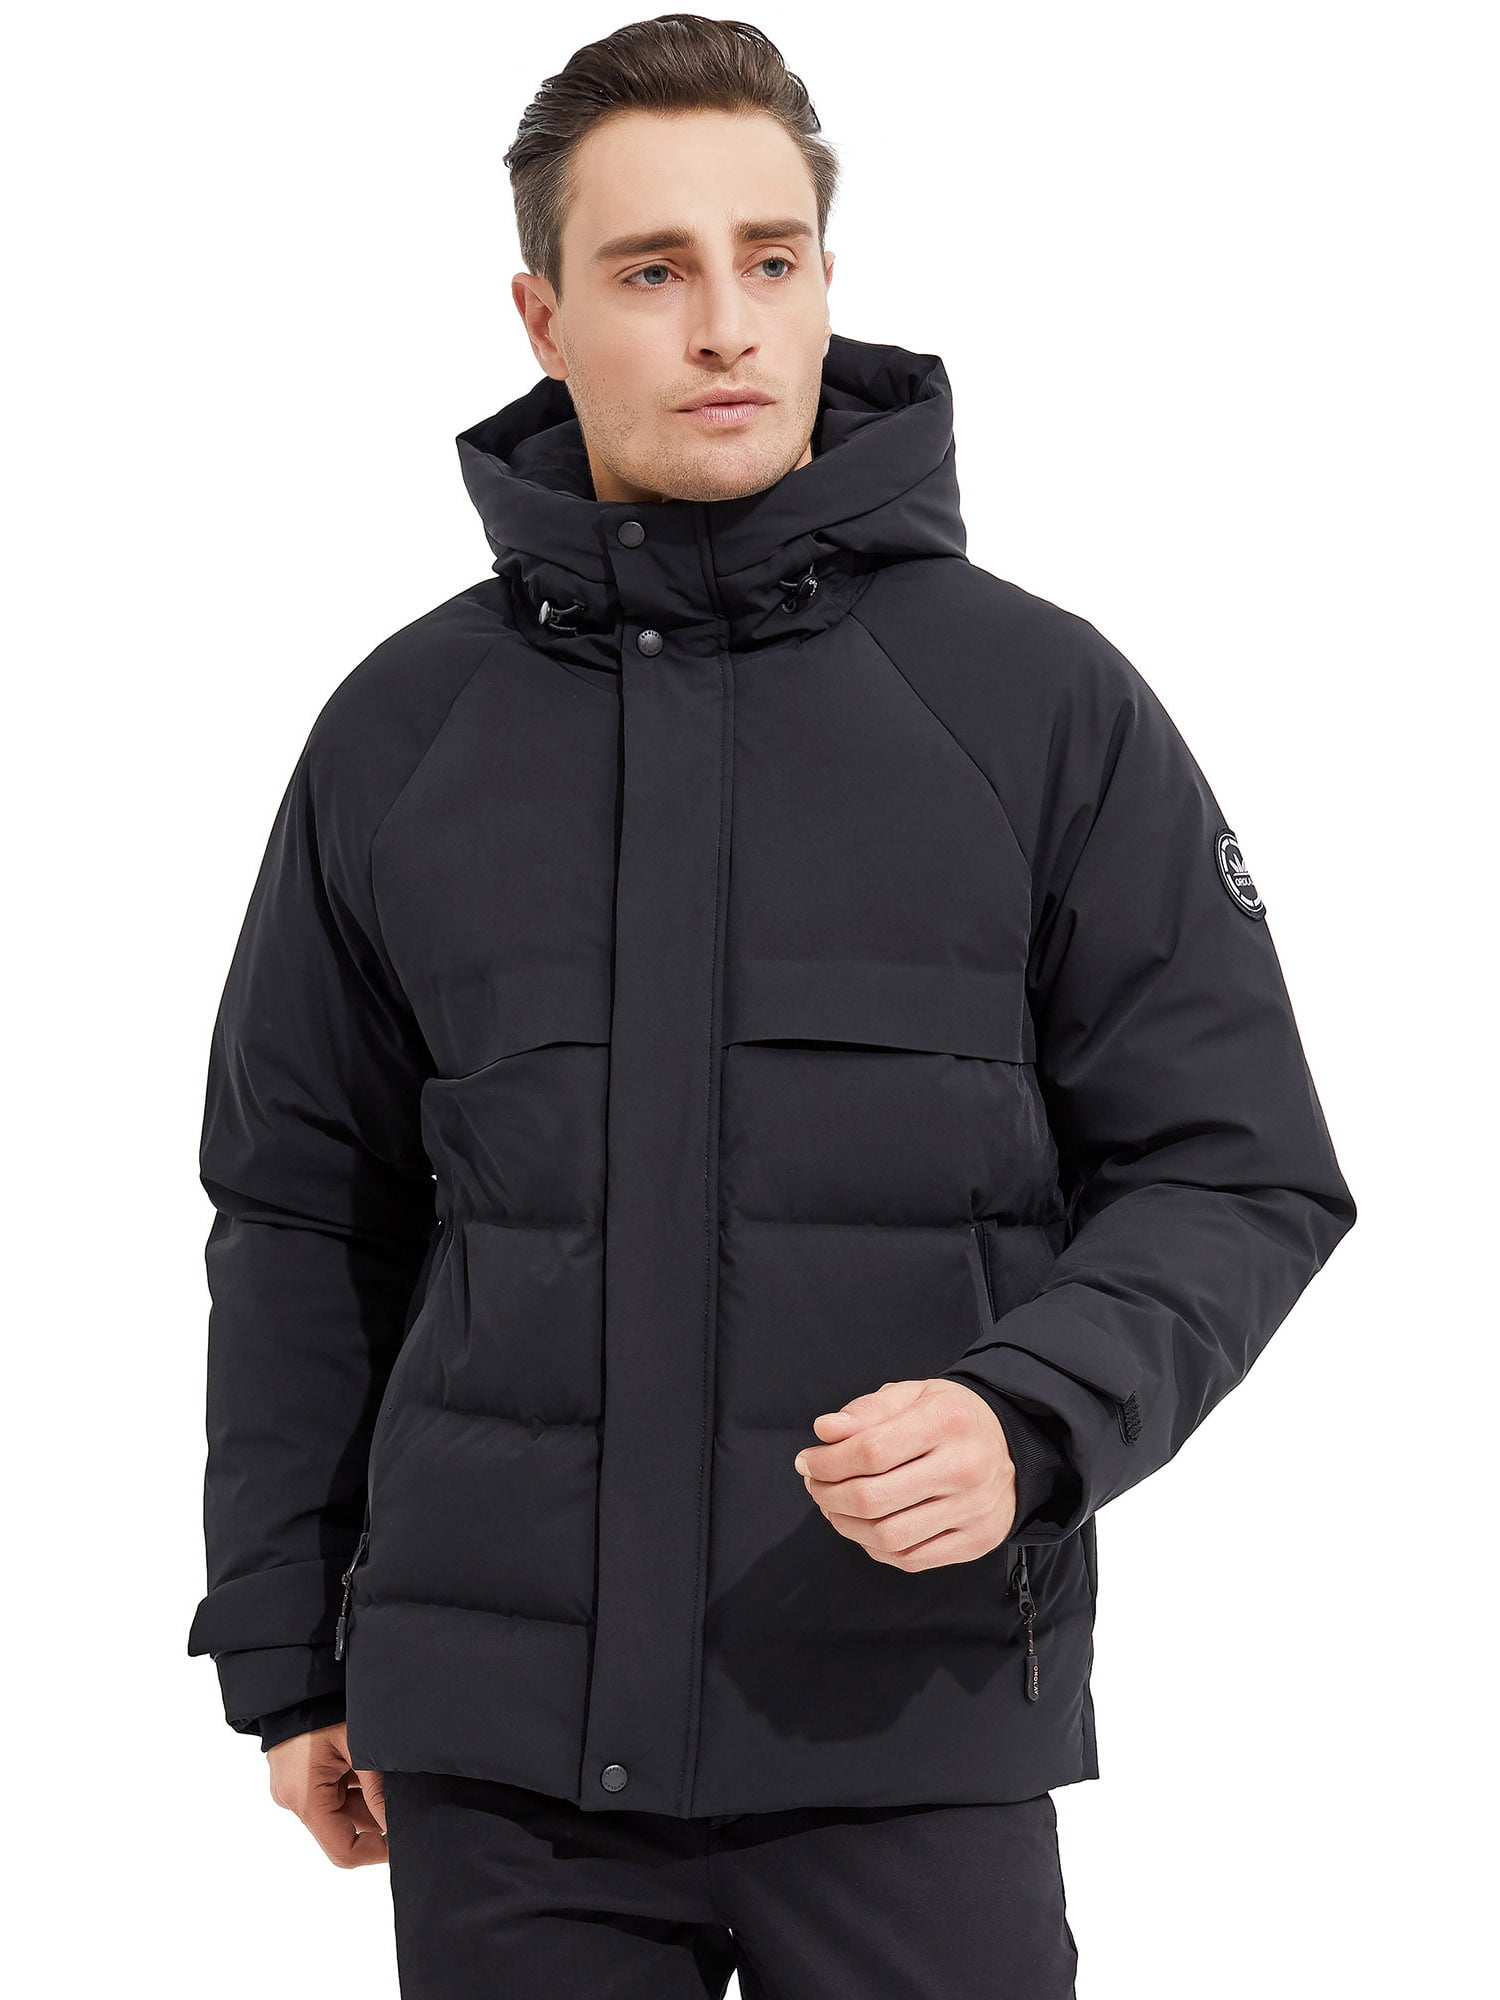 Orolay Men's Winter Down Jacket with Adjustable Drawstring Hood Ribbed ...